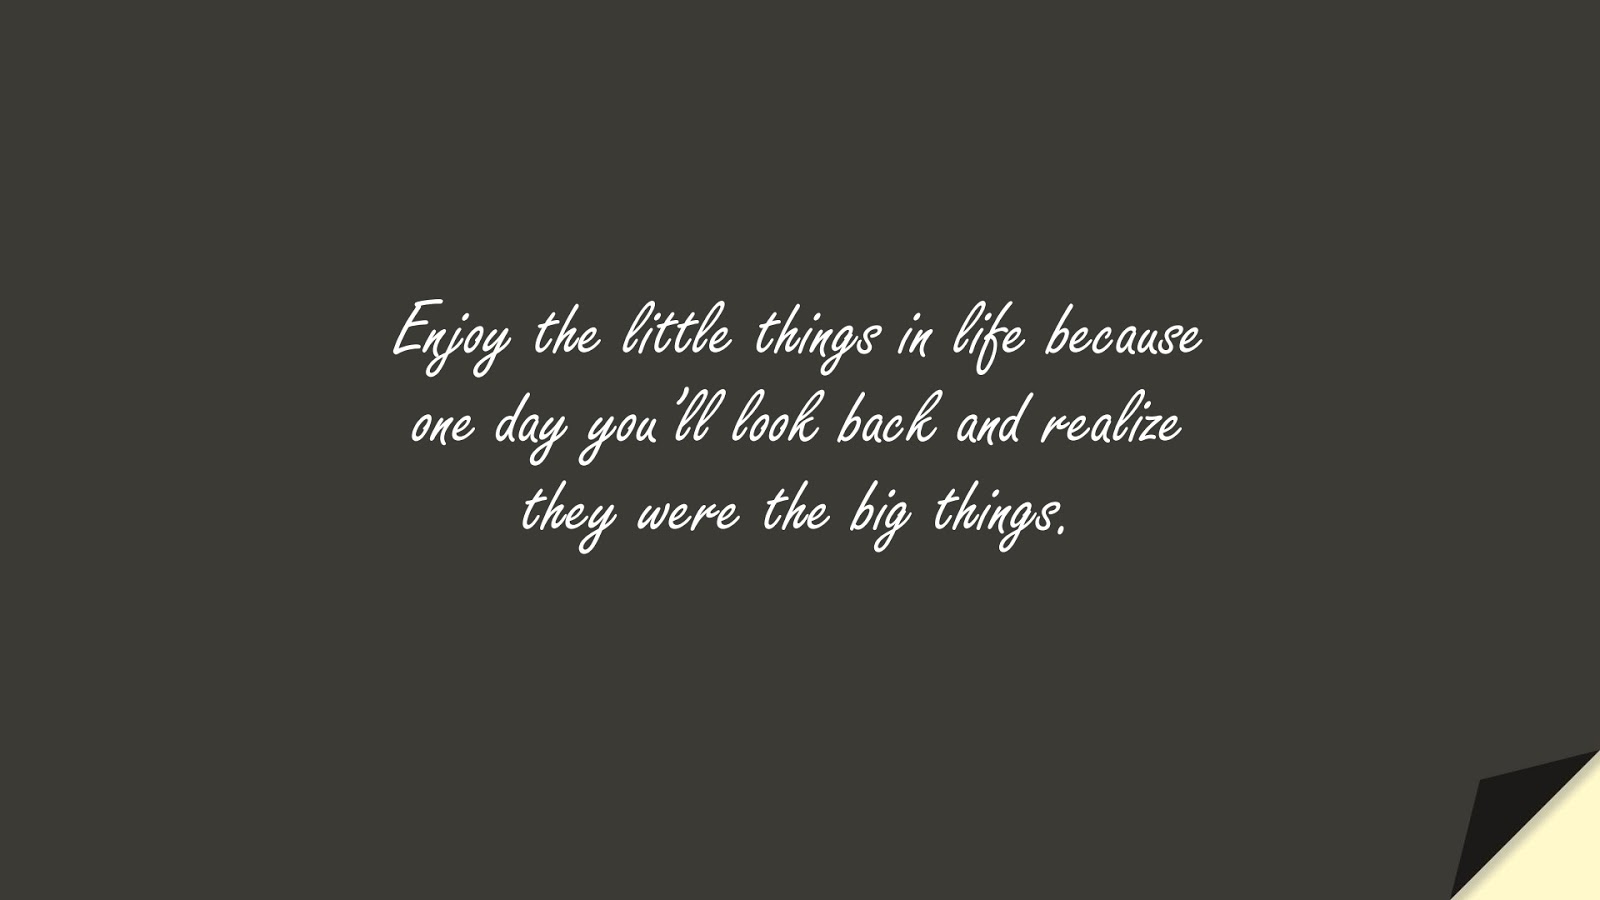 Enjoy the little things in life because one day you’ll look back and realize they were the big things.FALSE